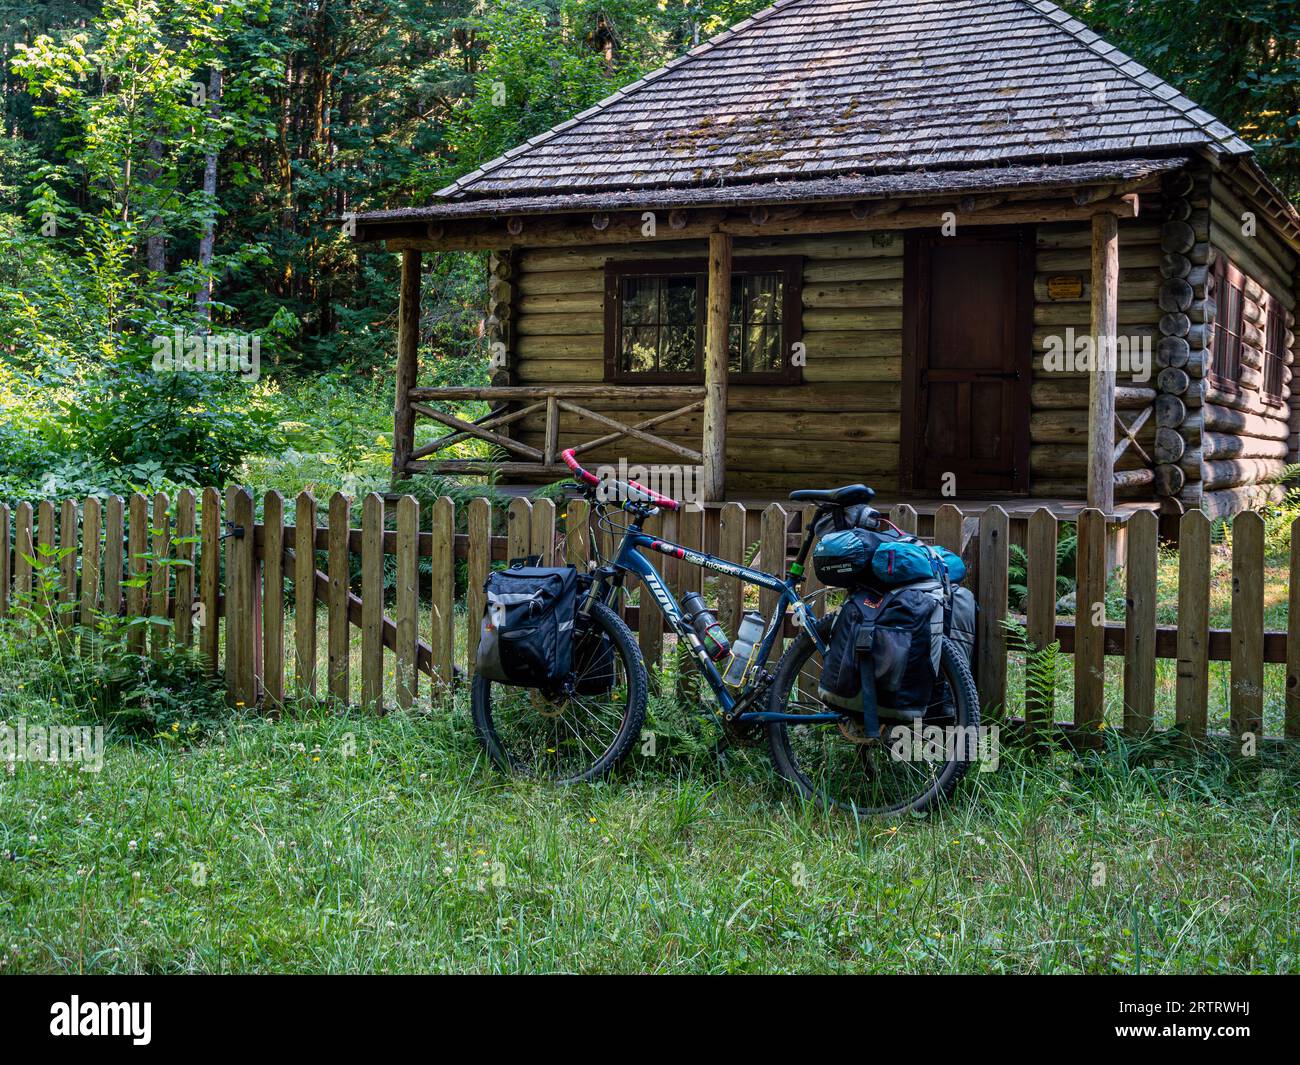 WA23686-00...WASHINGTON - Historic Interrorem Cabin, now a Forest Service rental, located along the Duckabush Road in the Olympic National Forest. Stock Photo